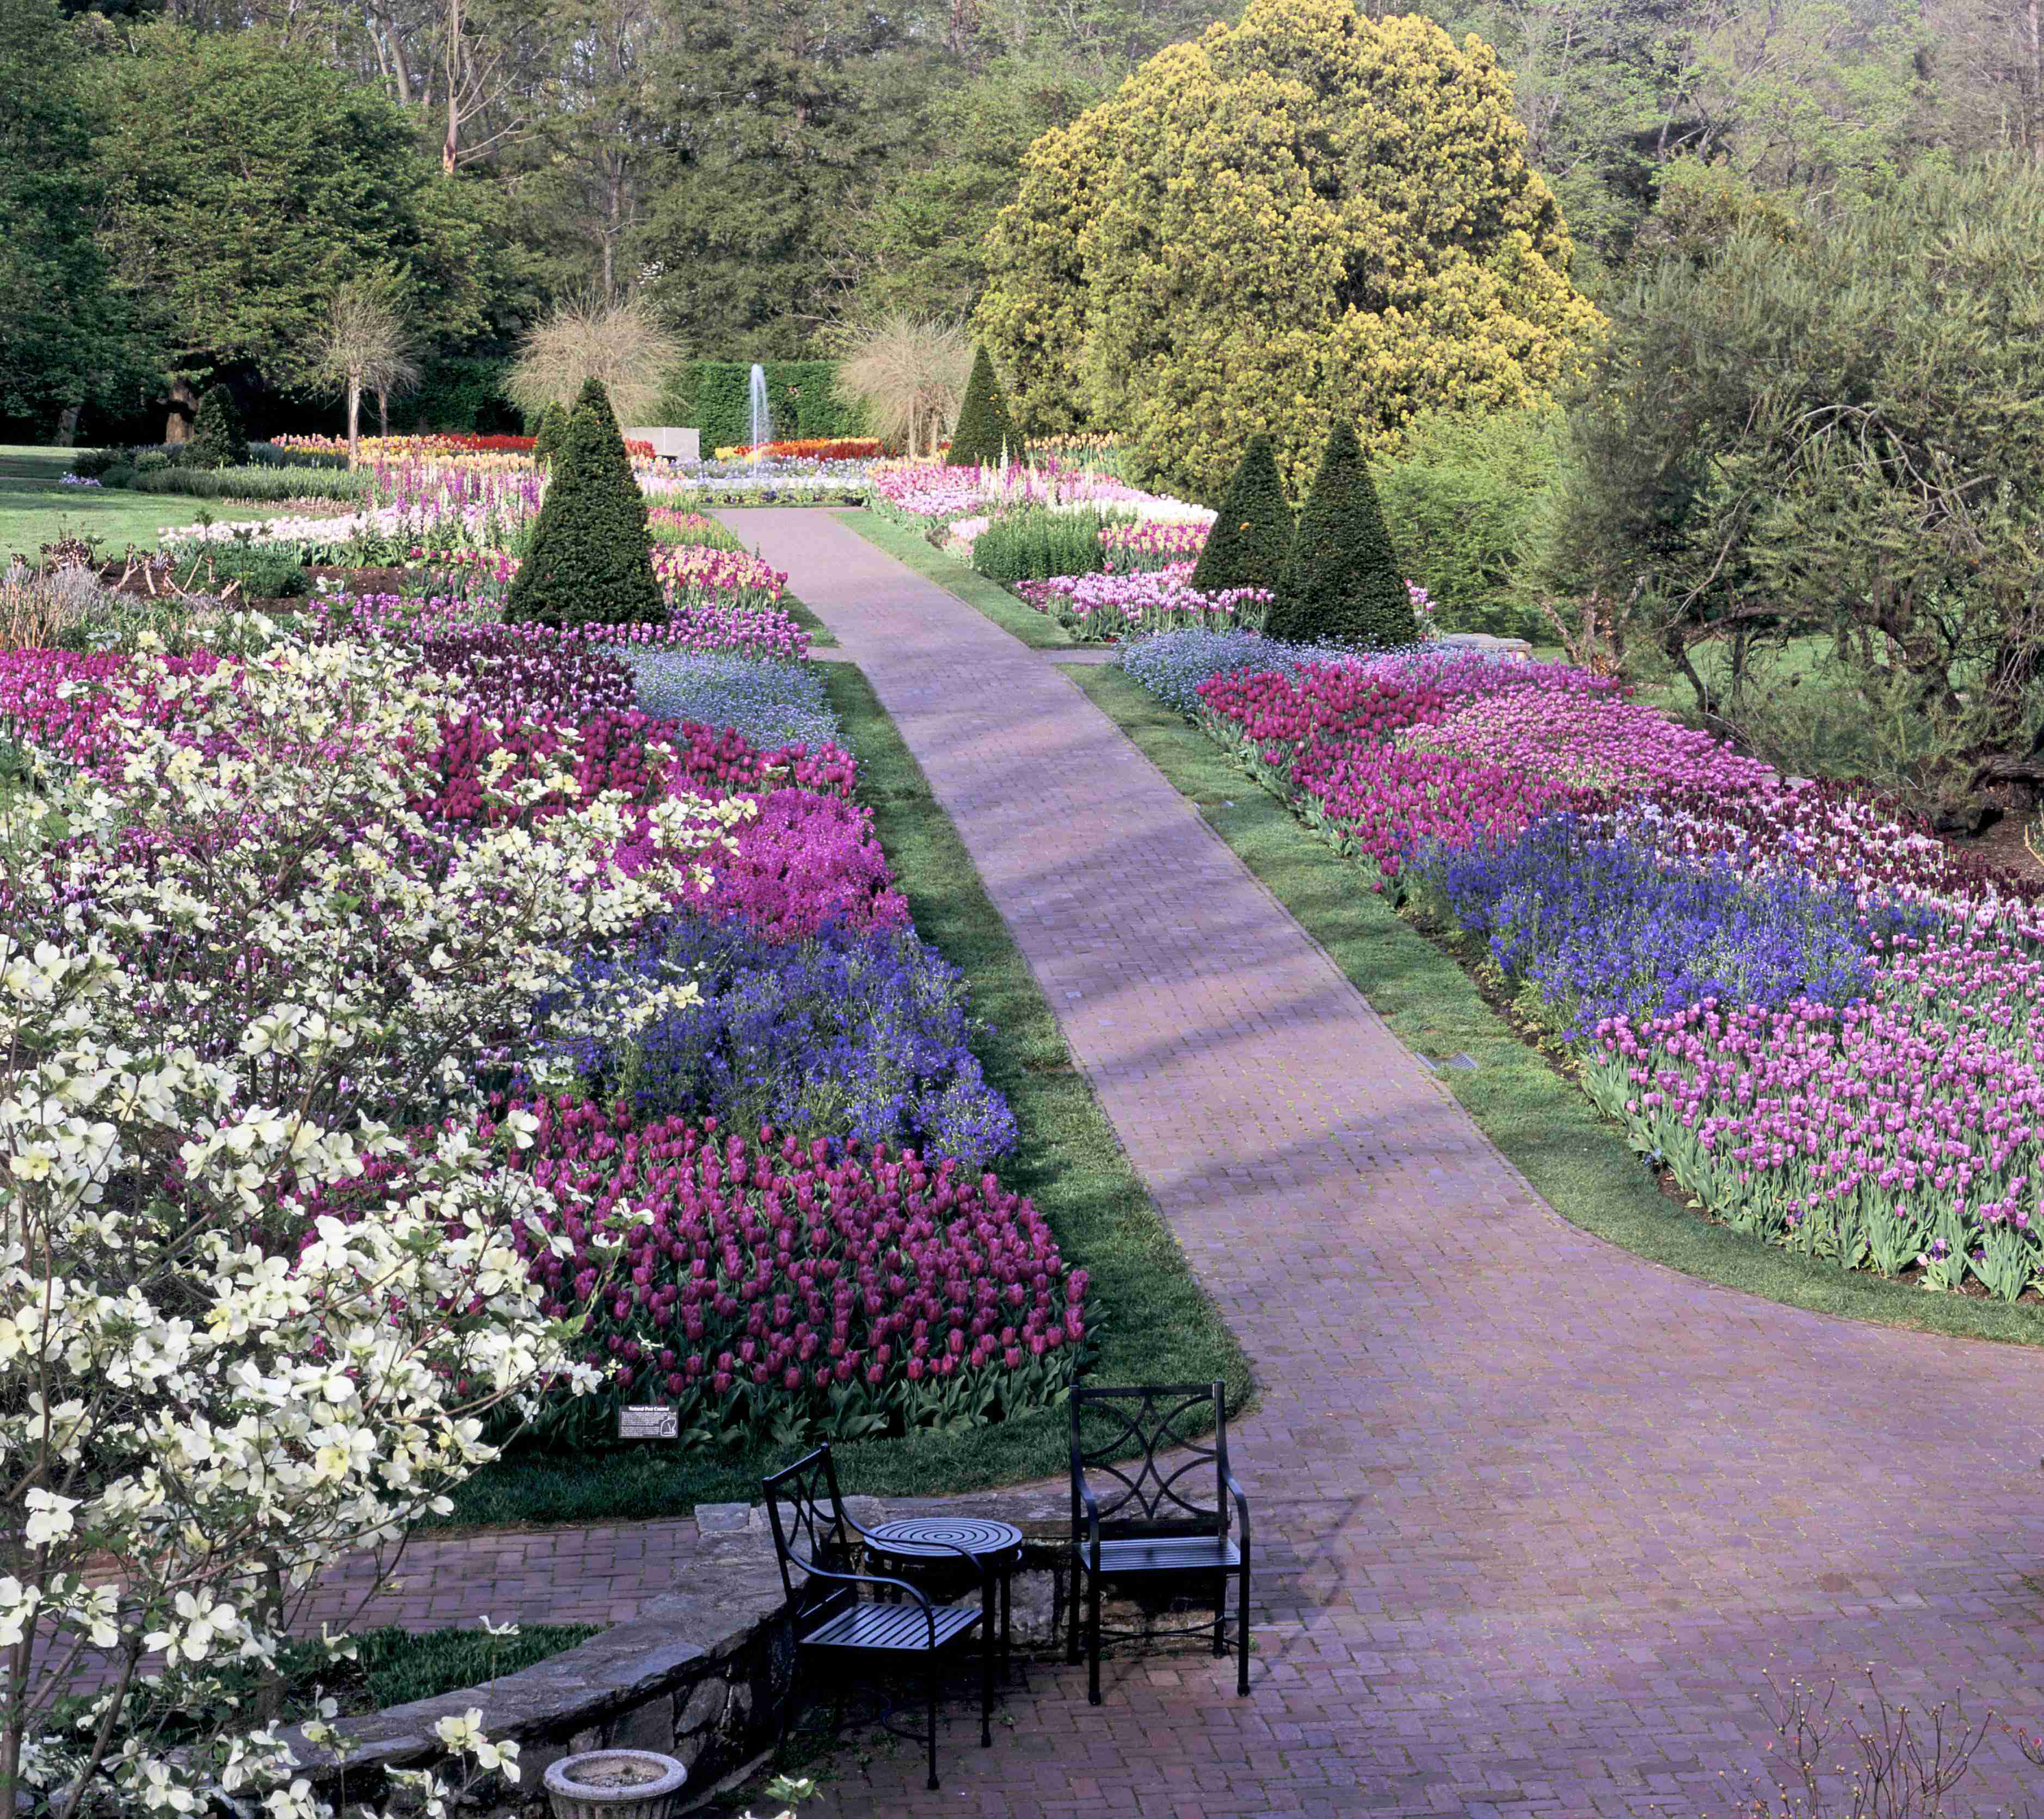 founder of longwood gardens legacy will live on